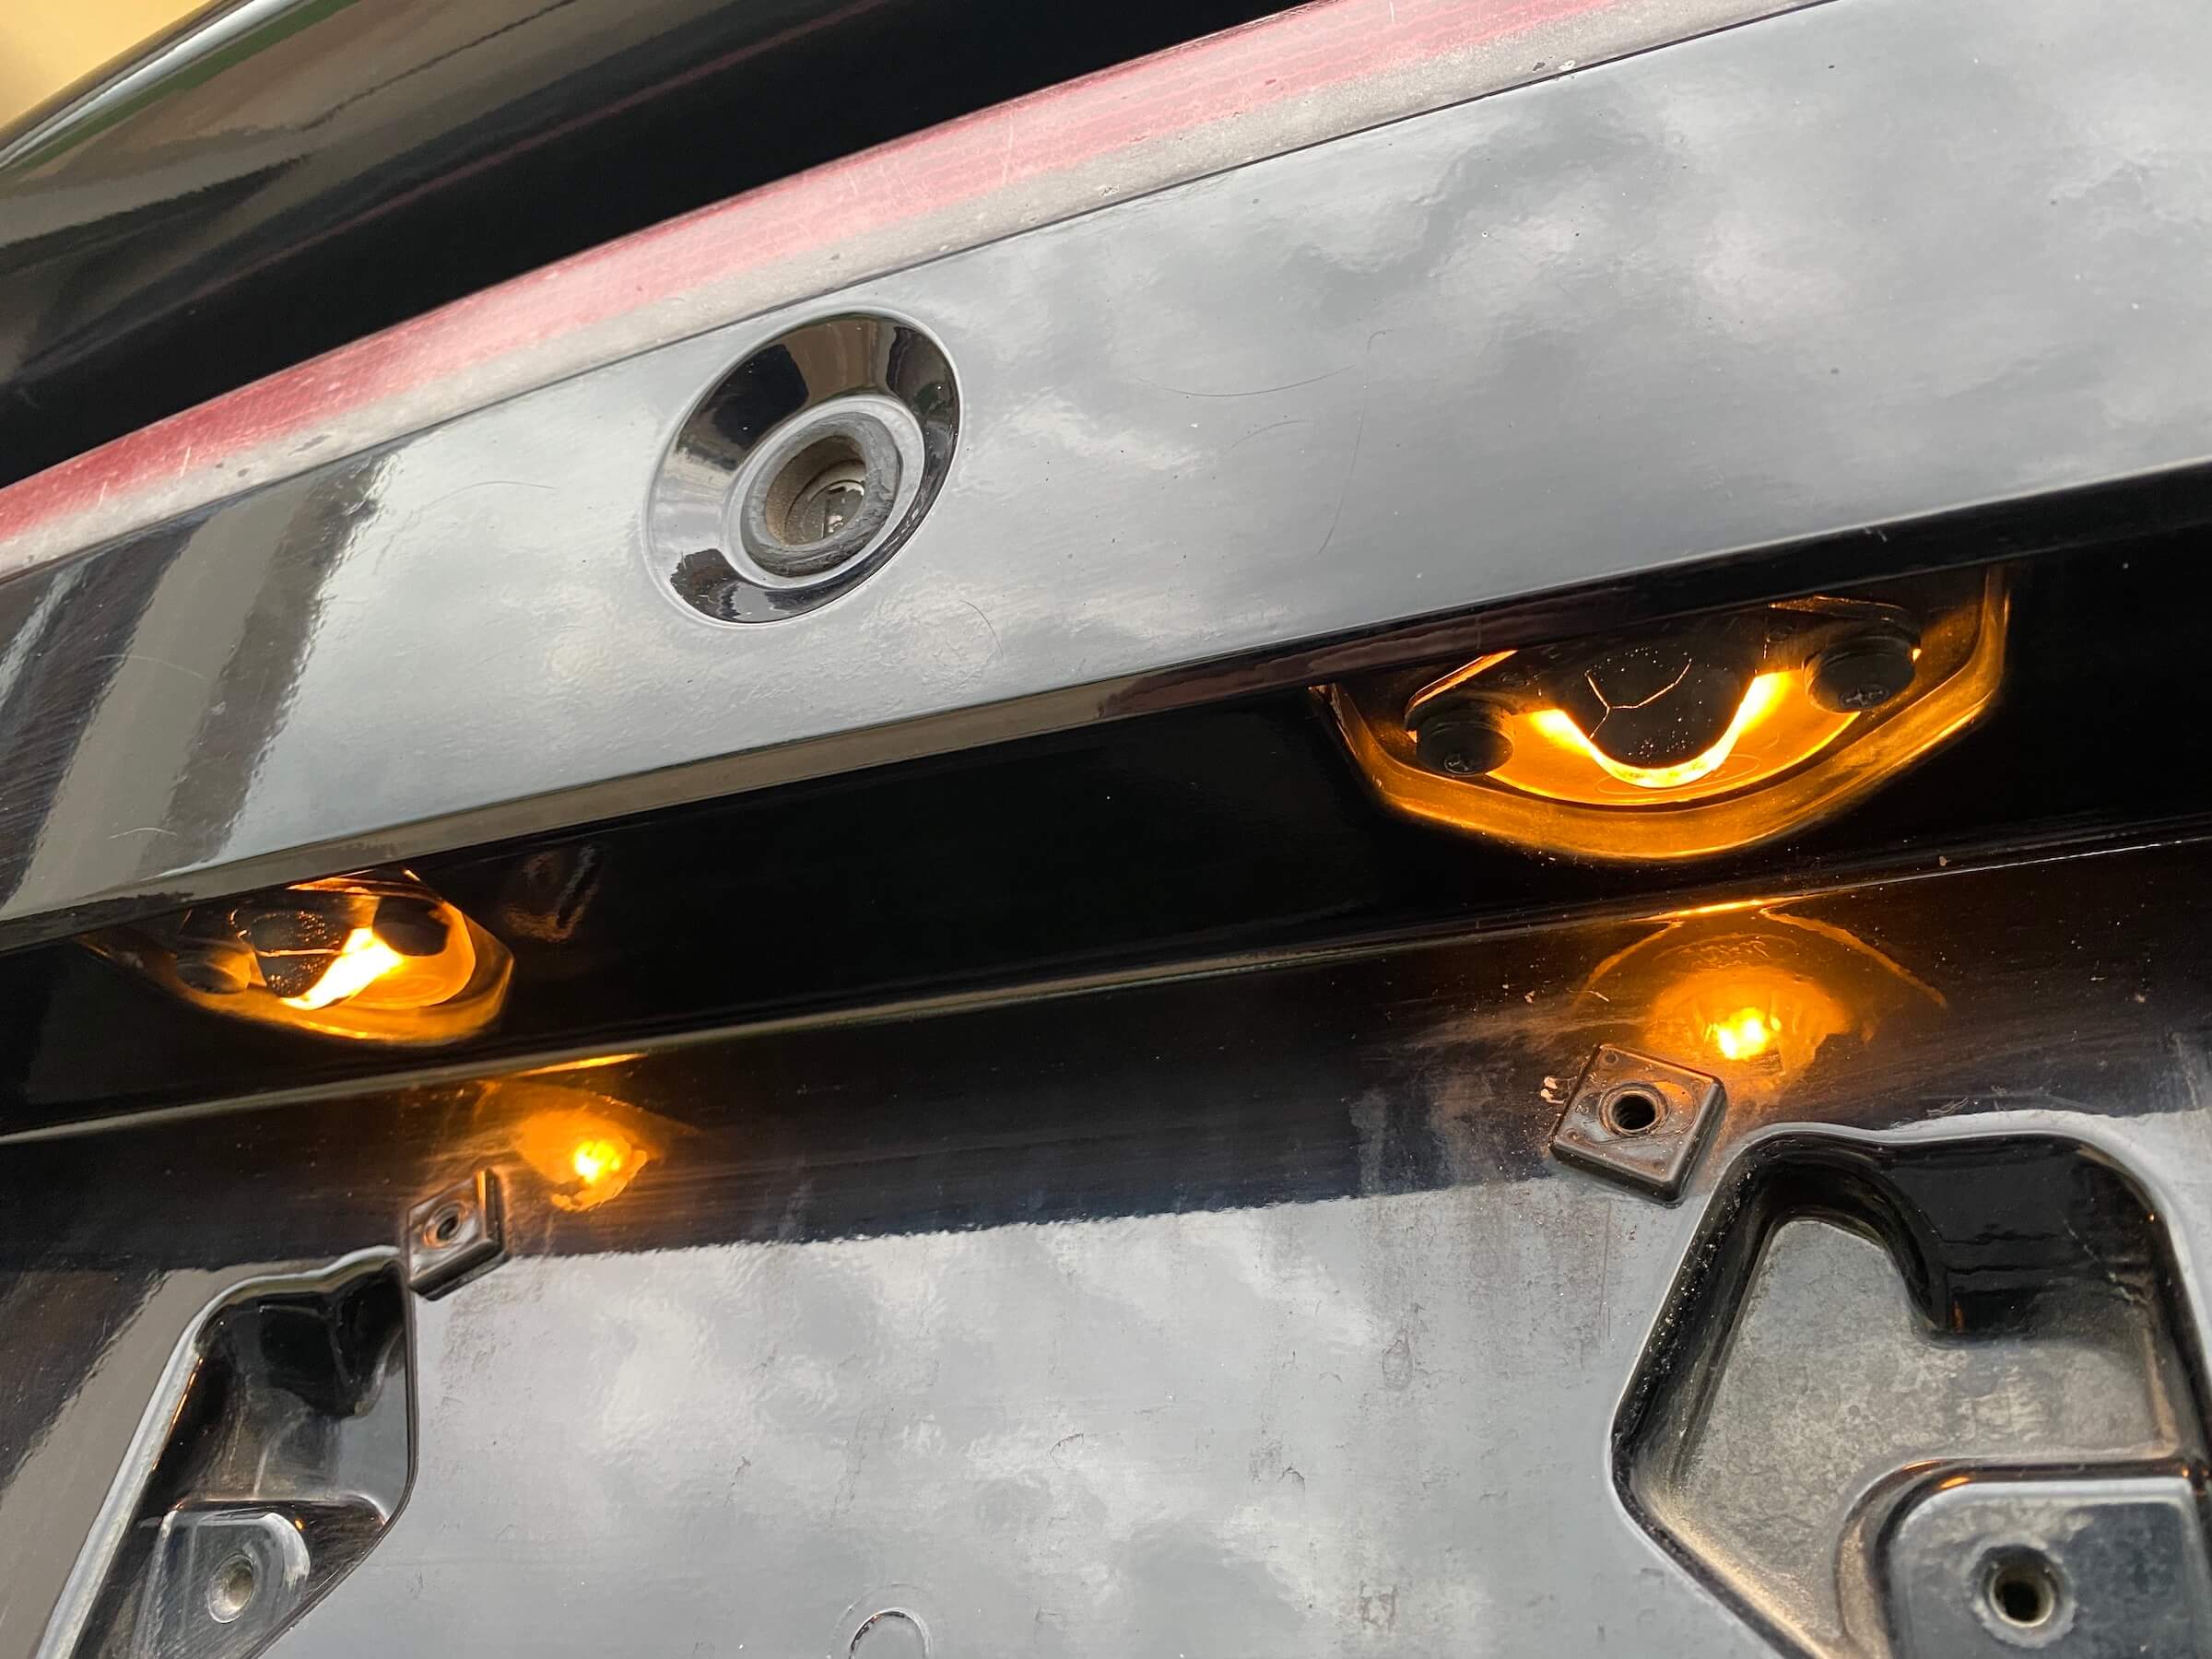 License Plate Light Check Cover Photo